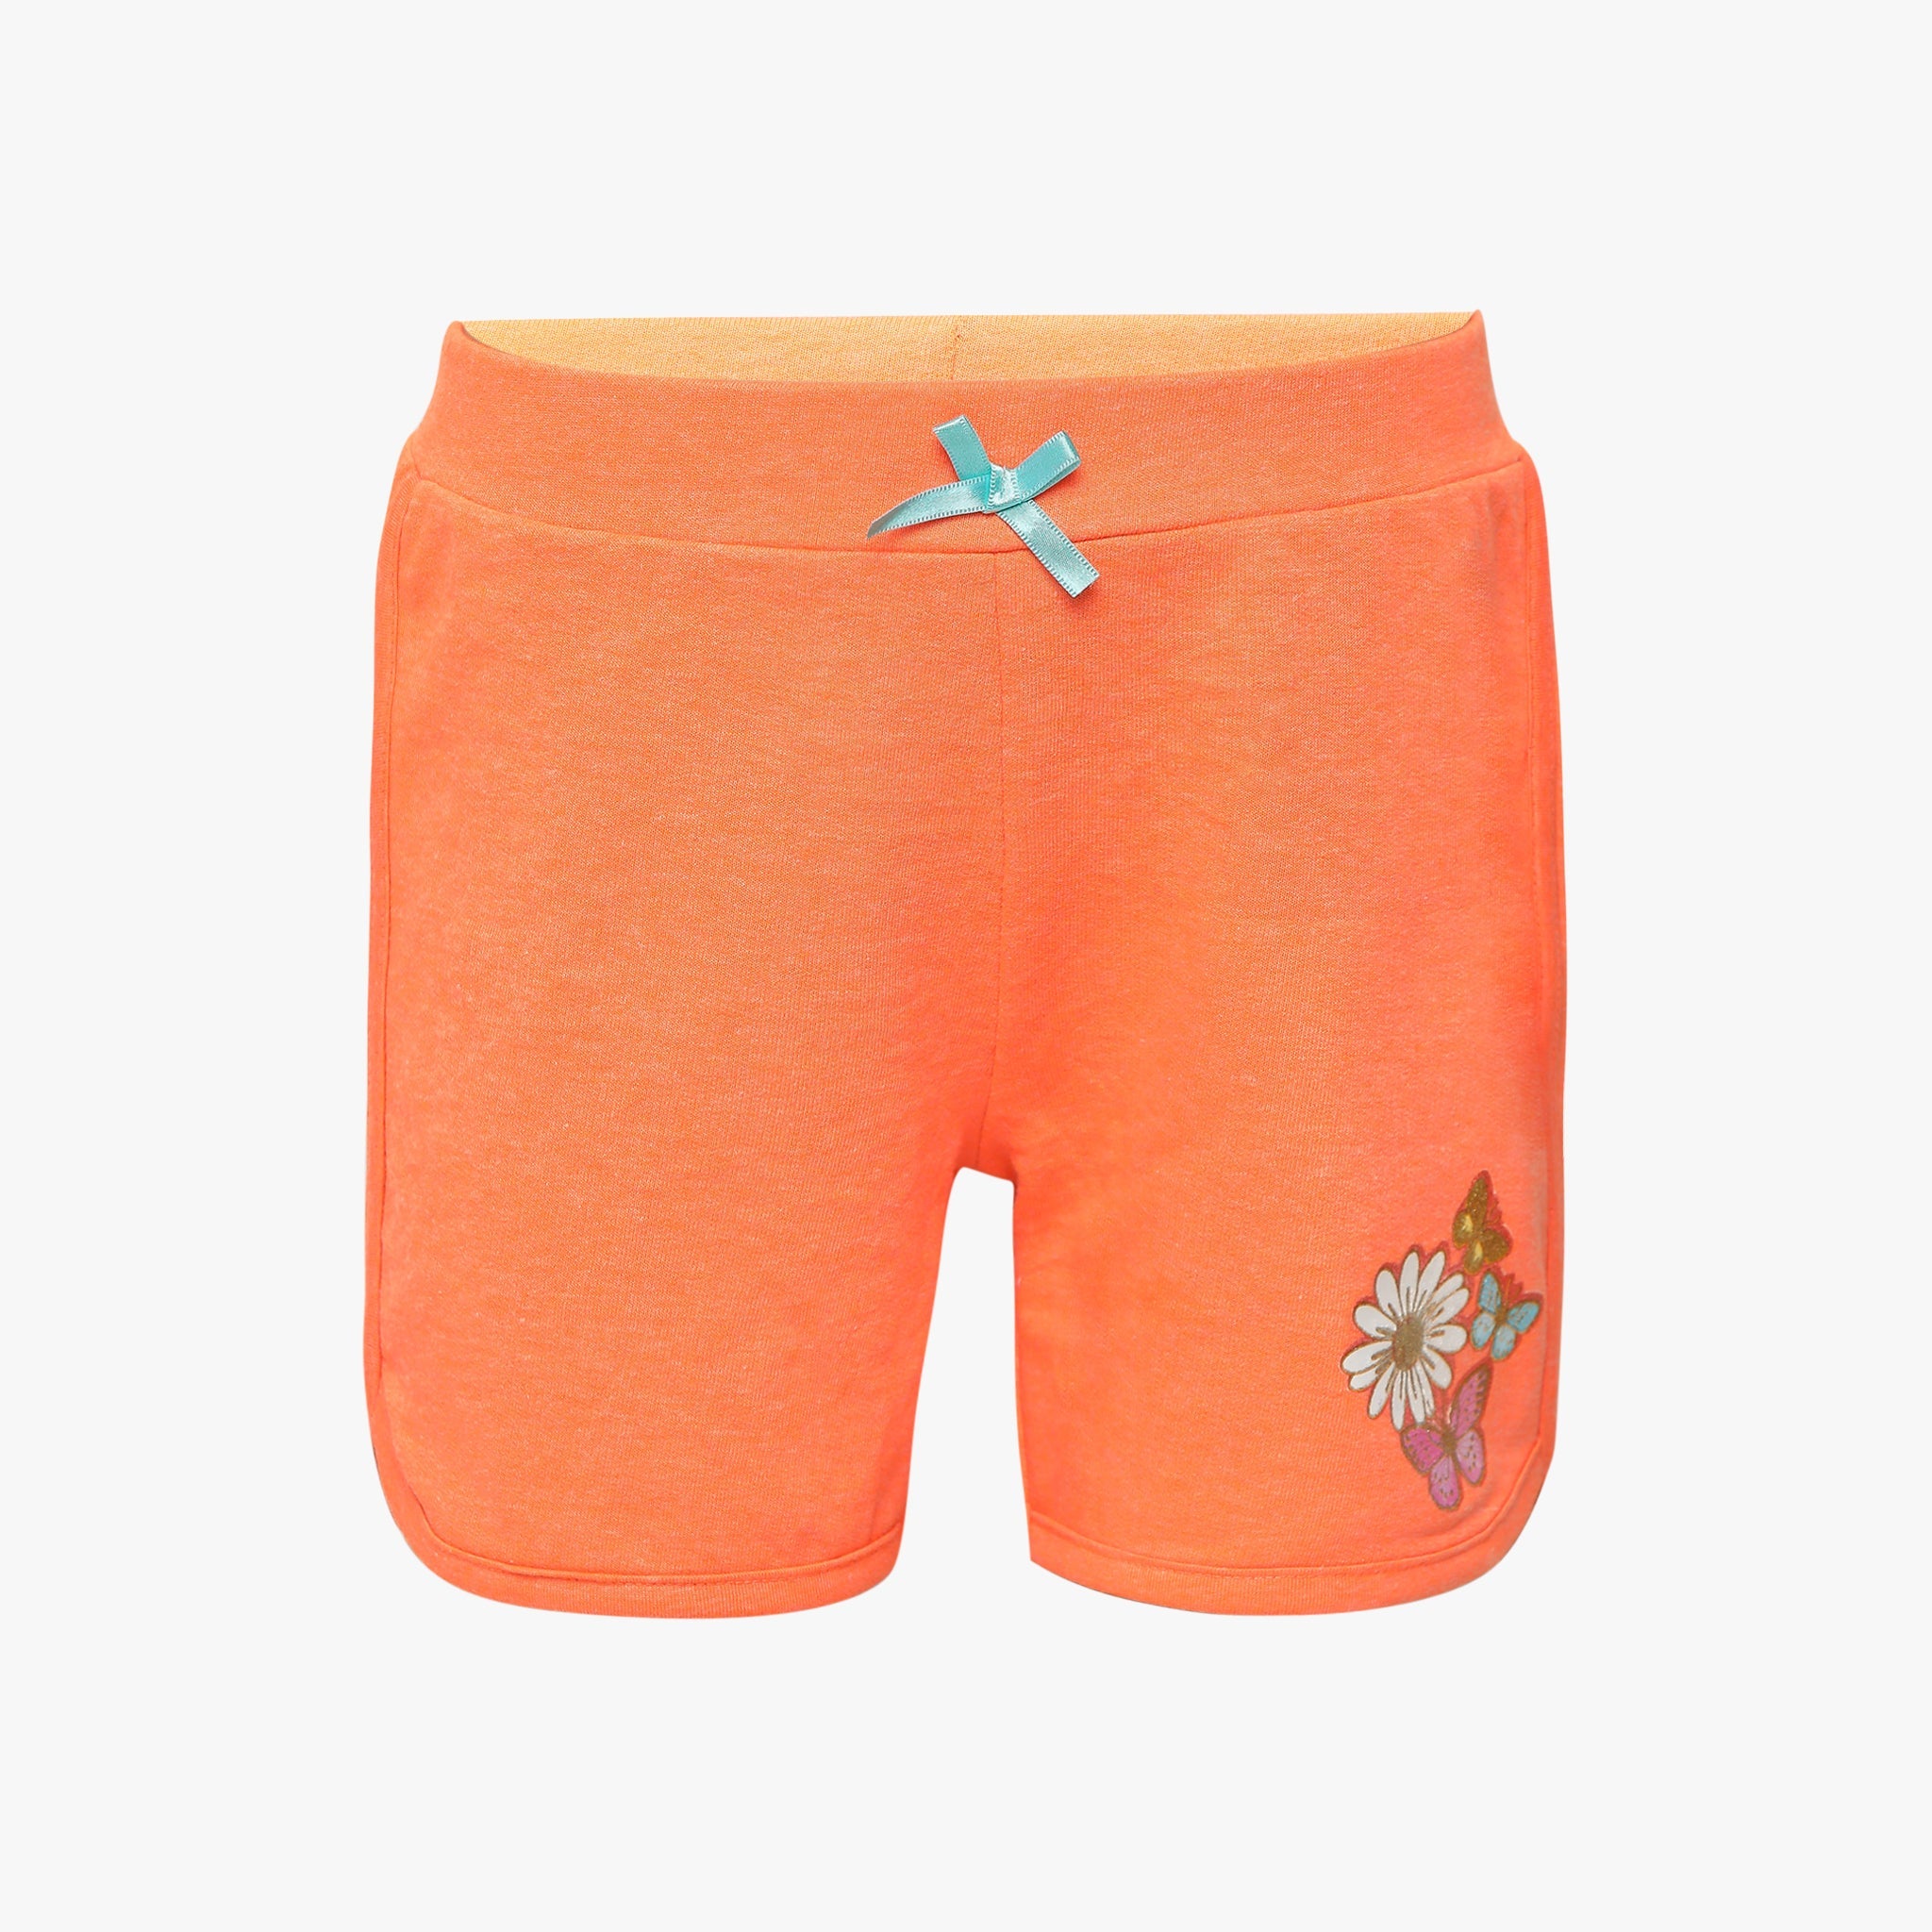 Girl Wearing Girl's Regular Fit Solid Mid Rise Short